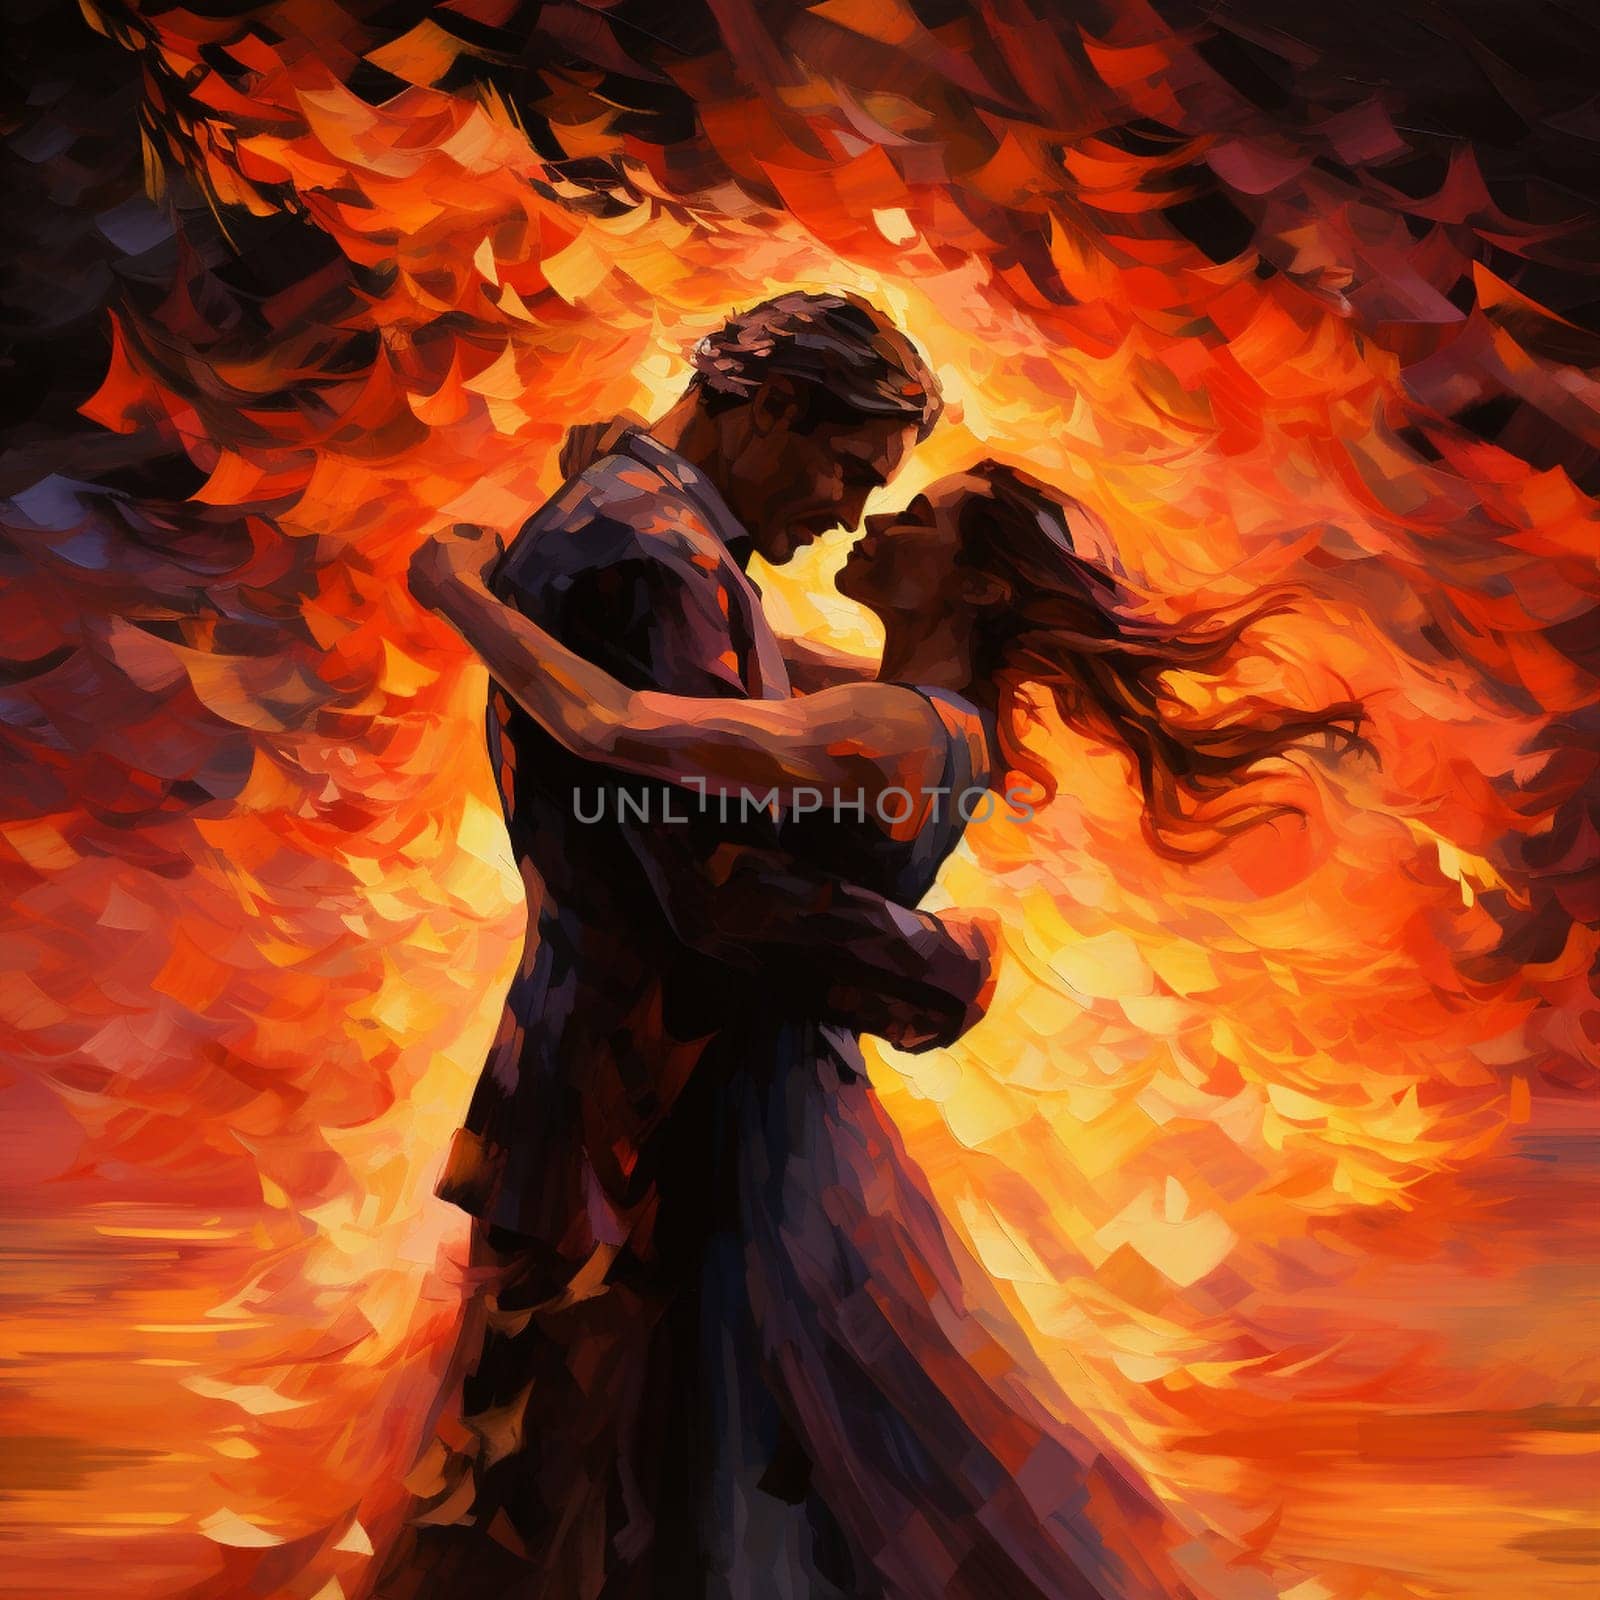 Experience the blazing intensity of love with this vibrant and dynamic artwork, titled 'Hearts Ablaze: Vows Illuminated by Fiery Passion'. In this captivating image, two figures exchange passionate vows amidst a blazing fire, symbolizing the raw and fervent emotions they share. The flames dance around the couple, representing the passion and heat of their love. The artwork conveys the transformative power of vows, capturing the electrifying atmosphere of this deeply emotional moment. The vibrant colors and dynamic art style create a visually striking scene that evokes a strong reaction from viewers, immersing them in the warmth and energy of the moment.